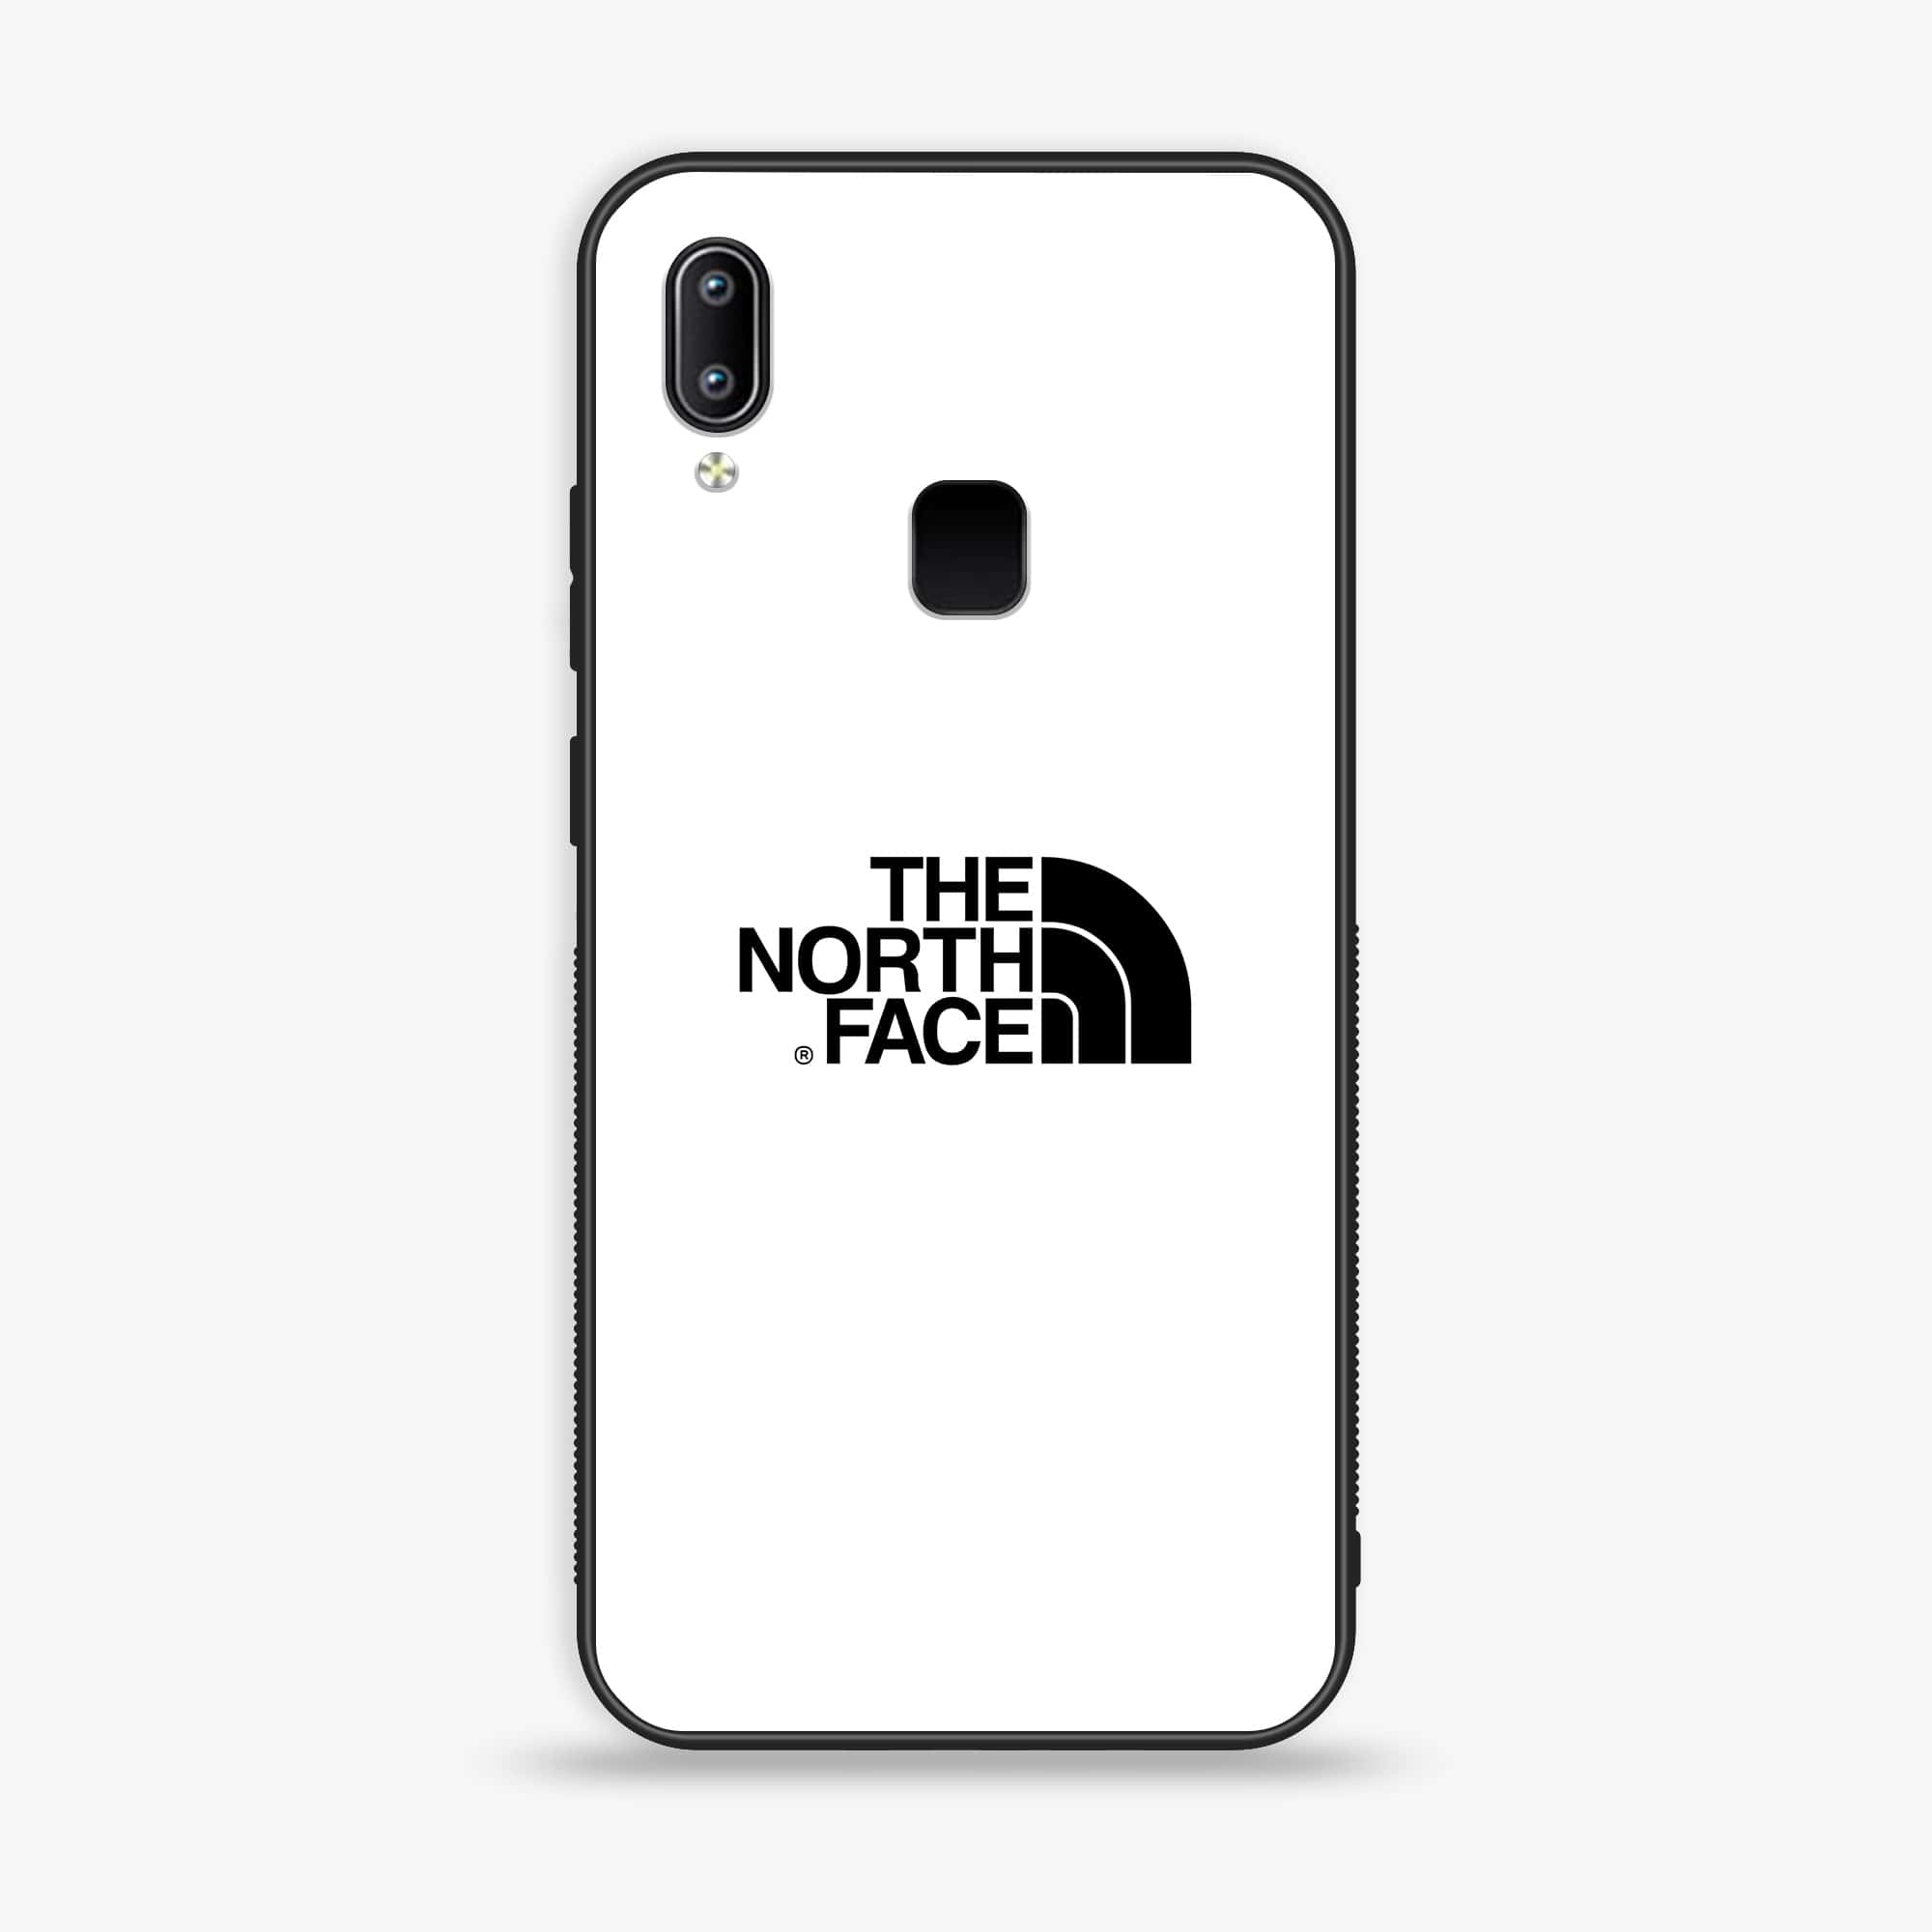 VIVO Y91 - The North Face Series - Premium Printed Glass soft Bumper shock Proof Case